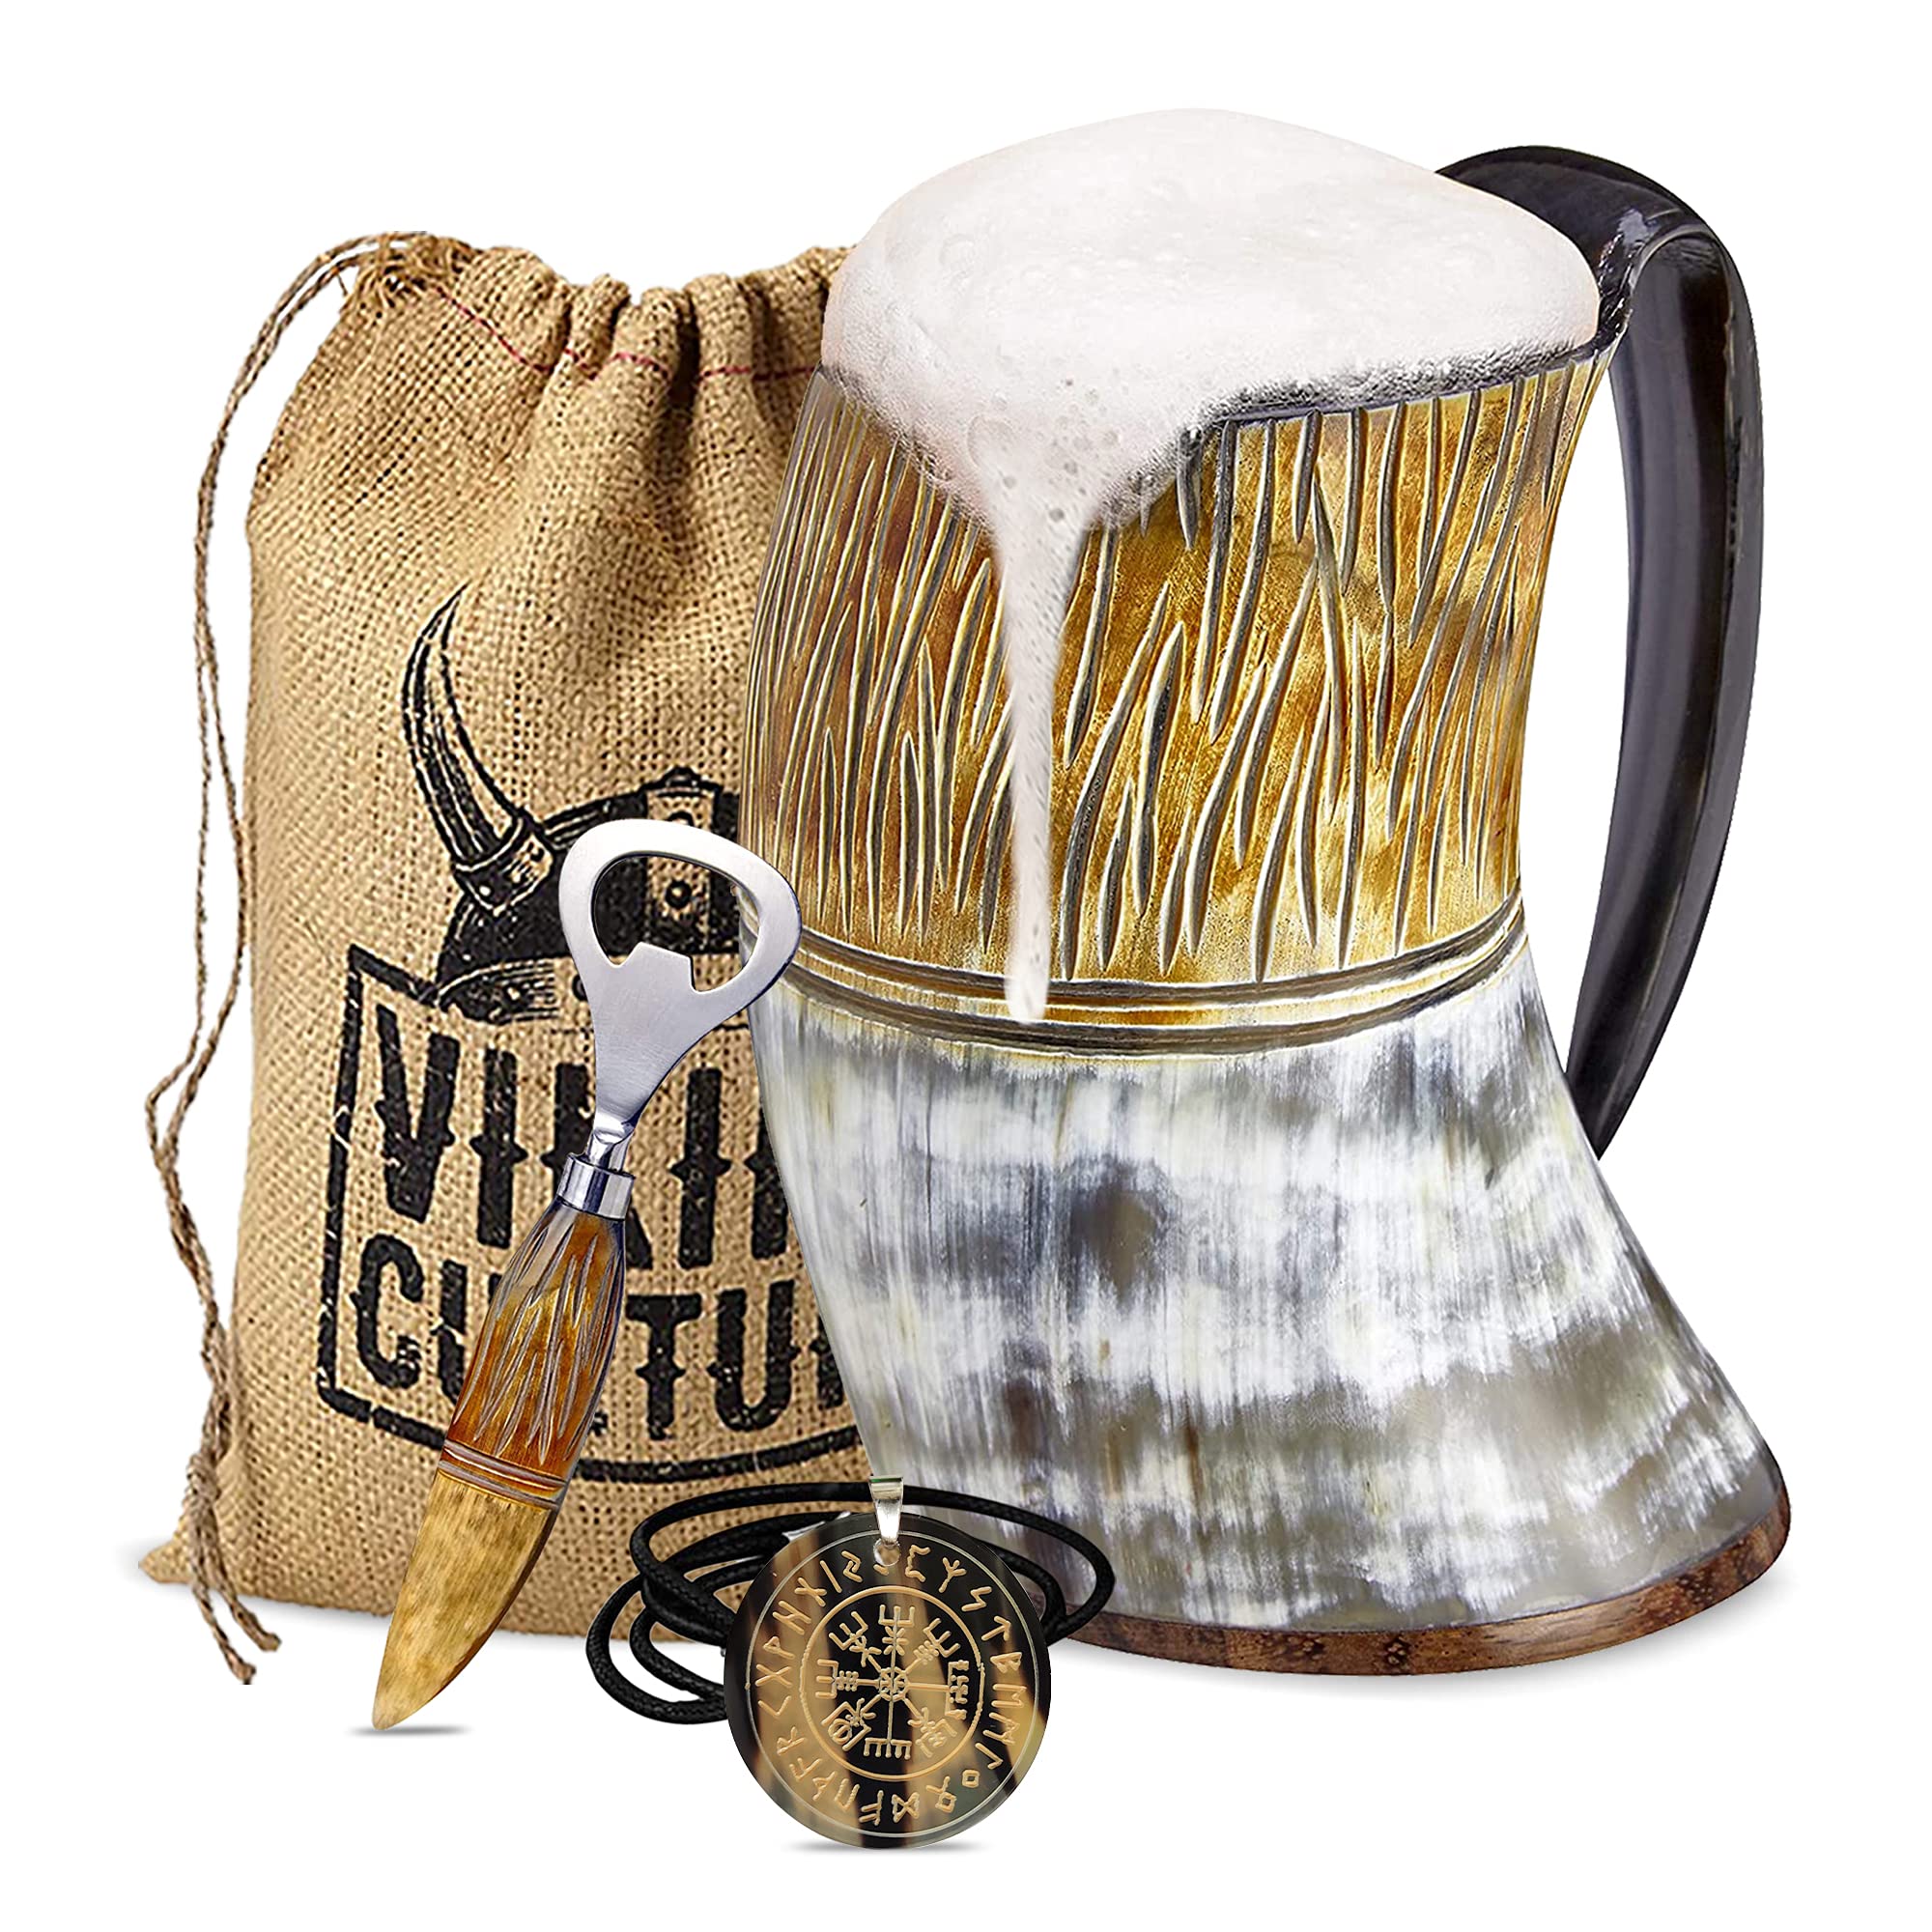 Viking Culture Ox Horn Mug, Norse Pendant, and Bottle Opener (3 Pc. Set) Authentic 32-oz. Ale, Mead, and Beer Tankard | Vintage Stein with Handle | - Natural Finish | The Jarl